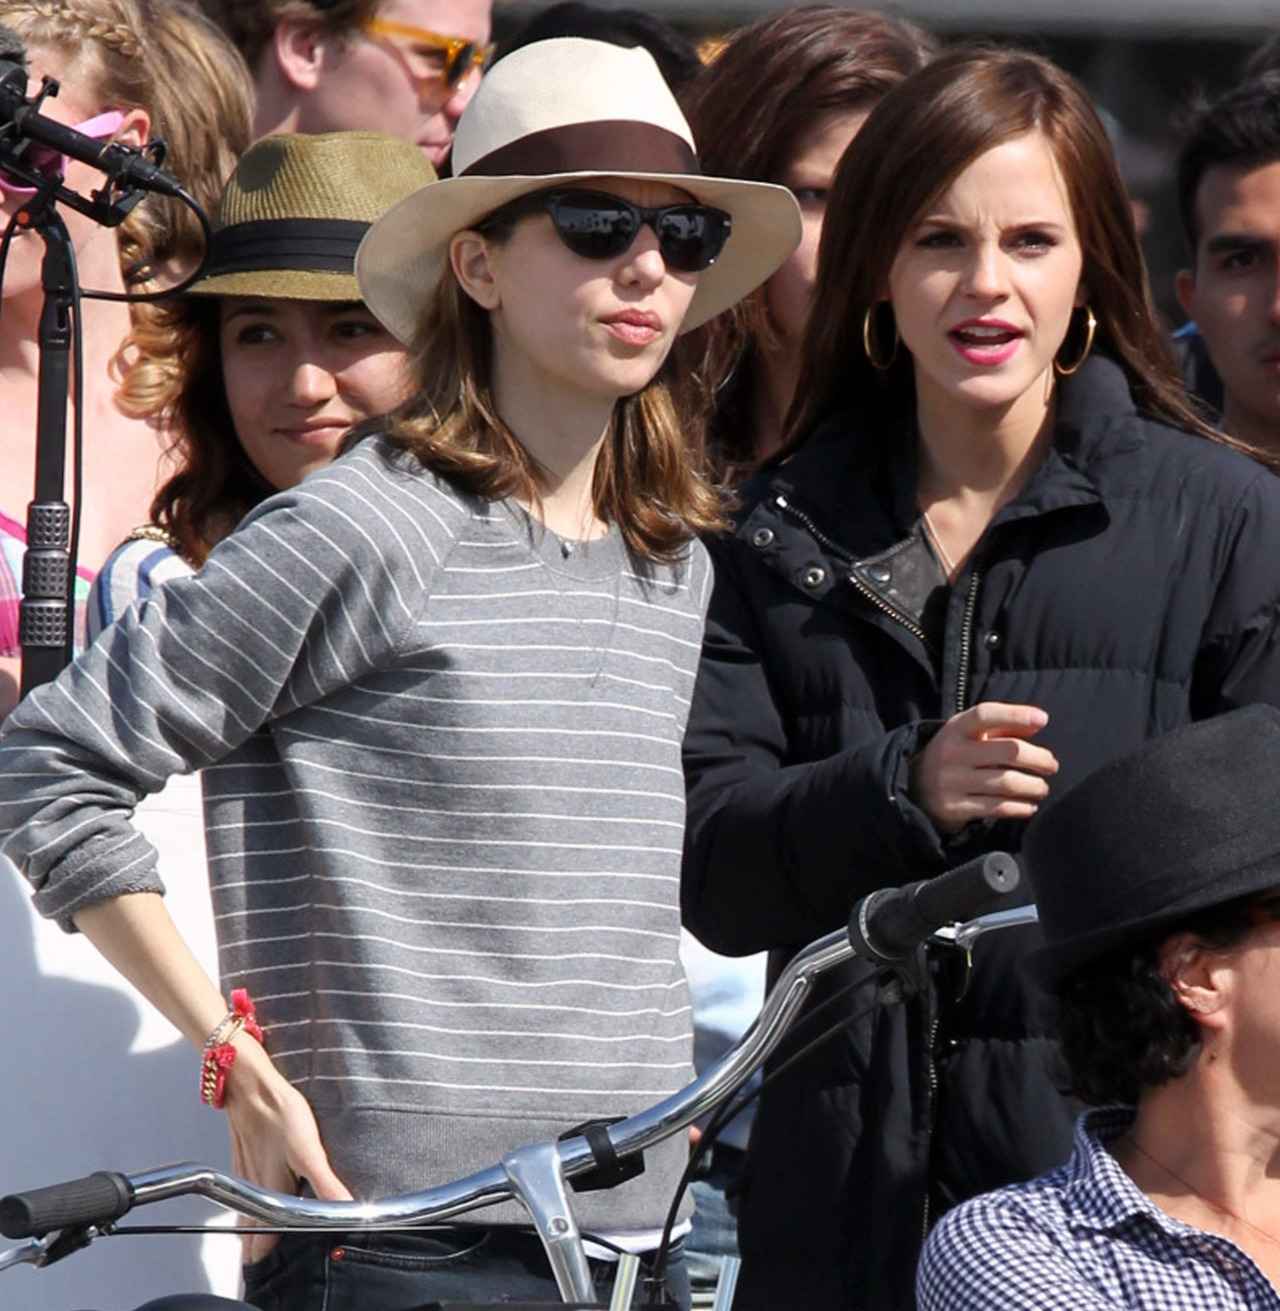 Sofia Coppola and Emma Watson on the set of The Bling Ring in Venice Beach, April 12th